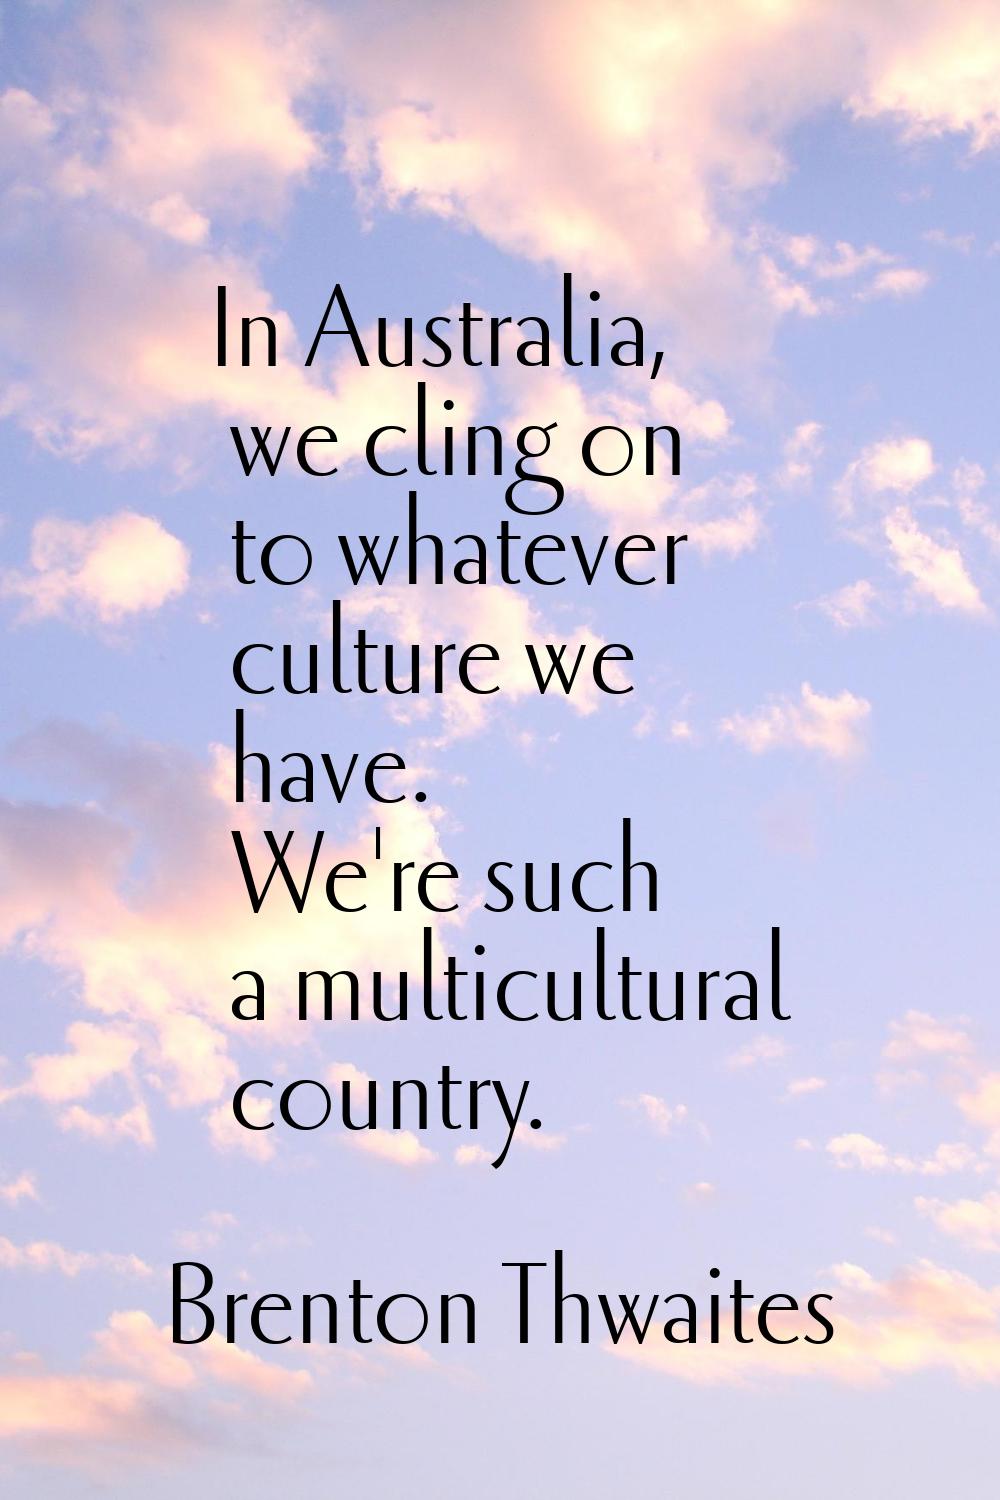 In Australia, we cling on to whatever culture we have. We're such a multicultural country.